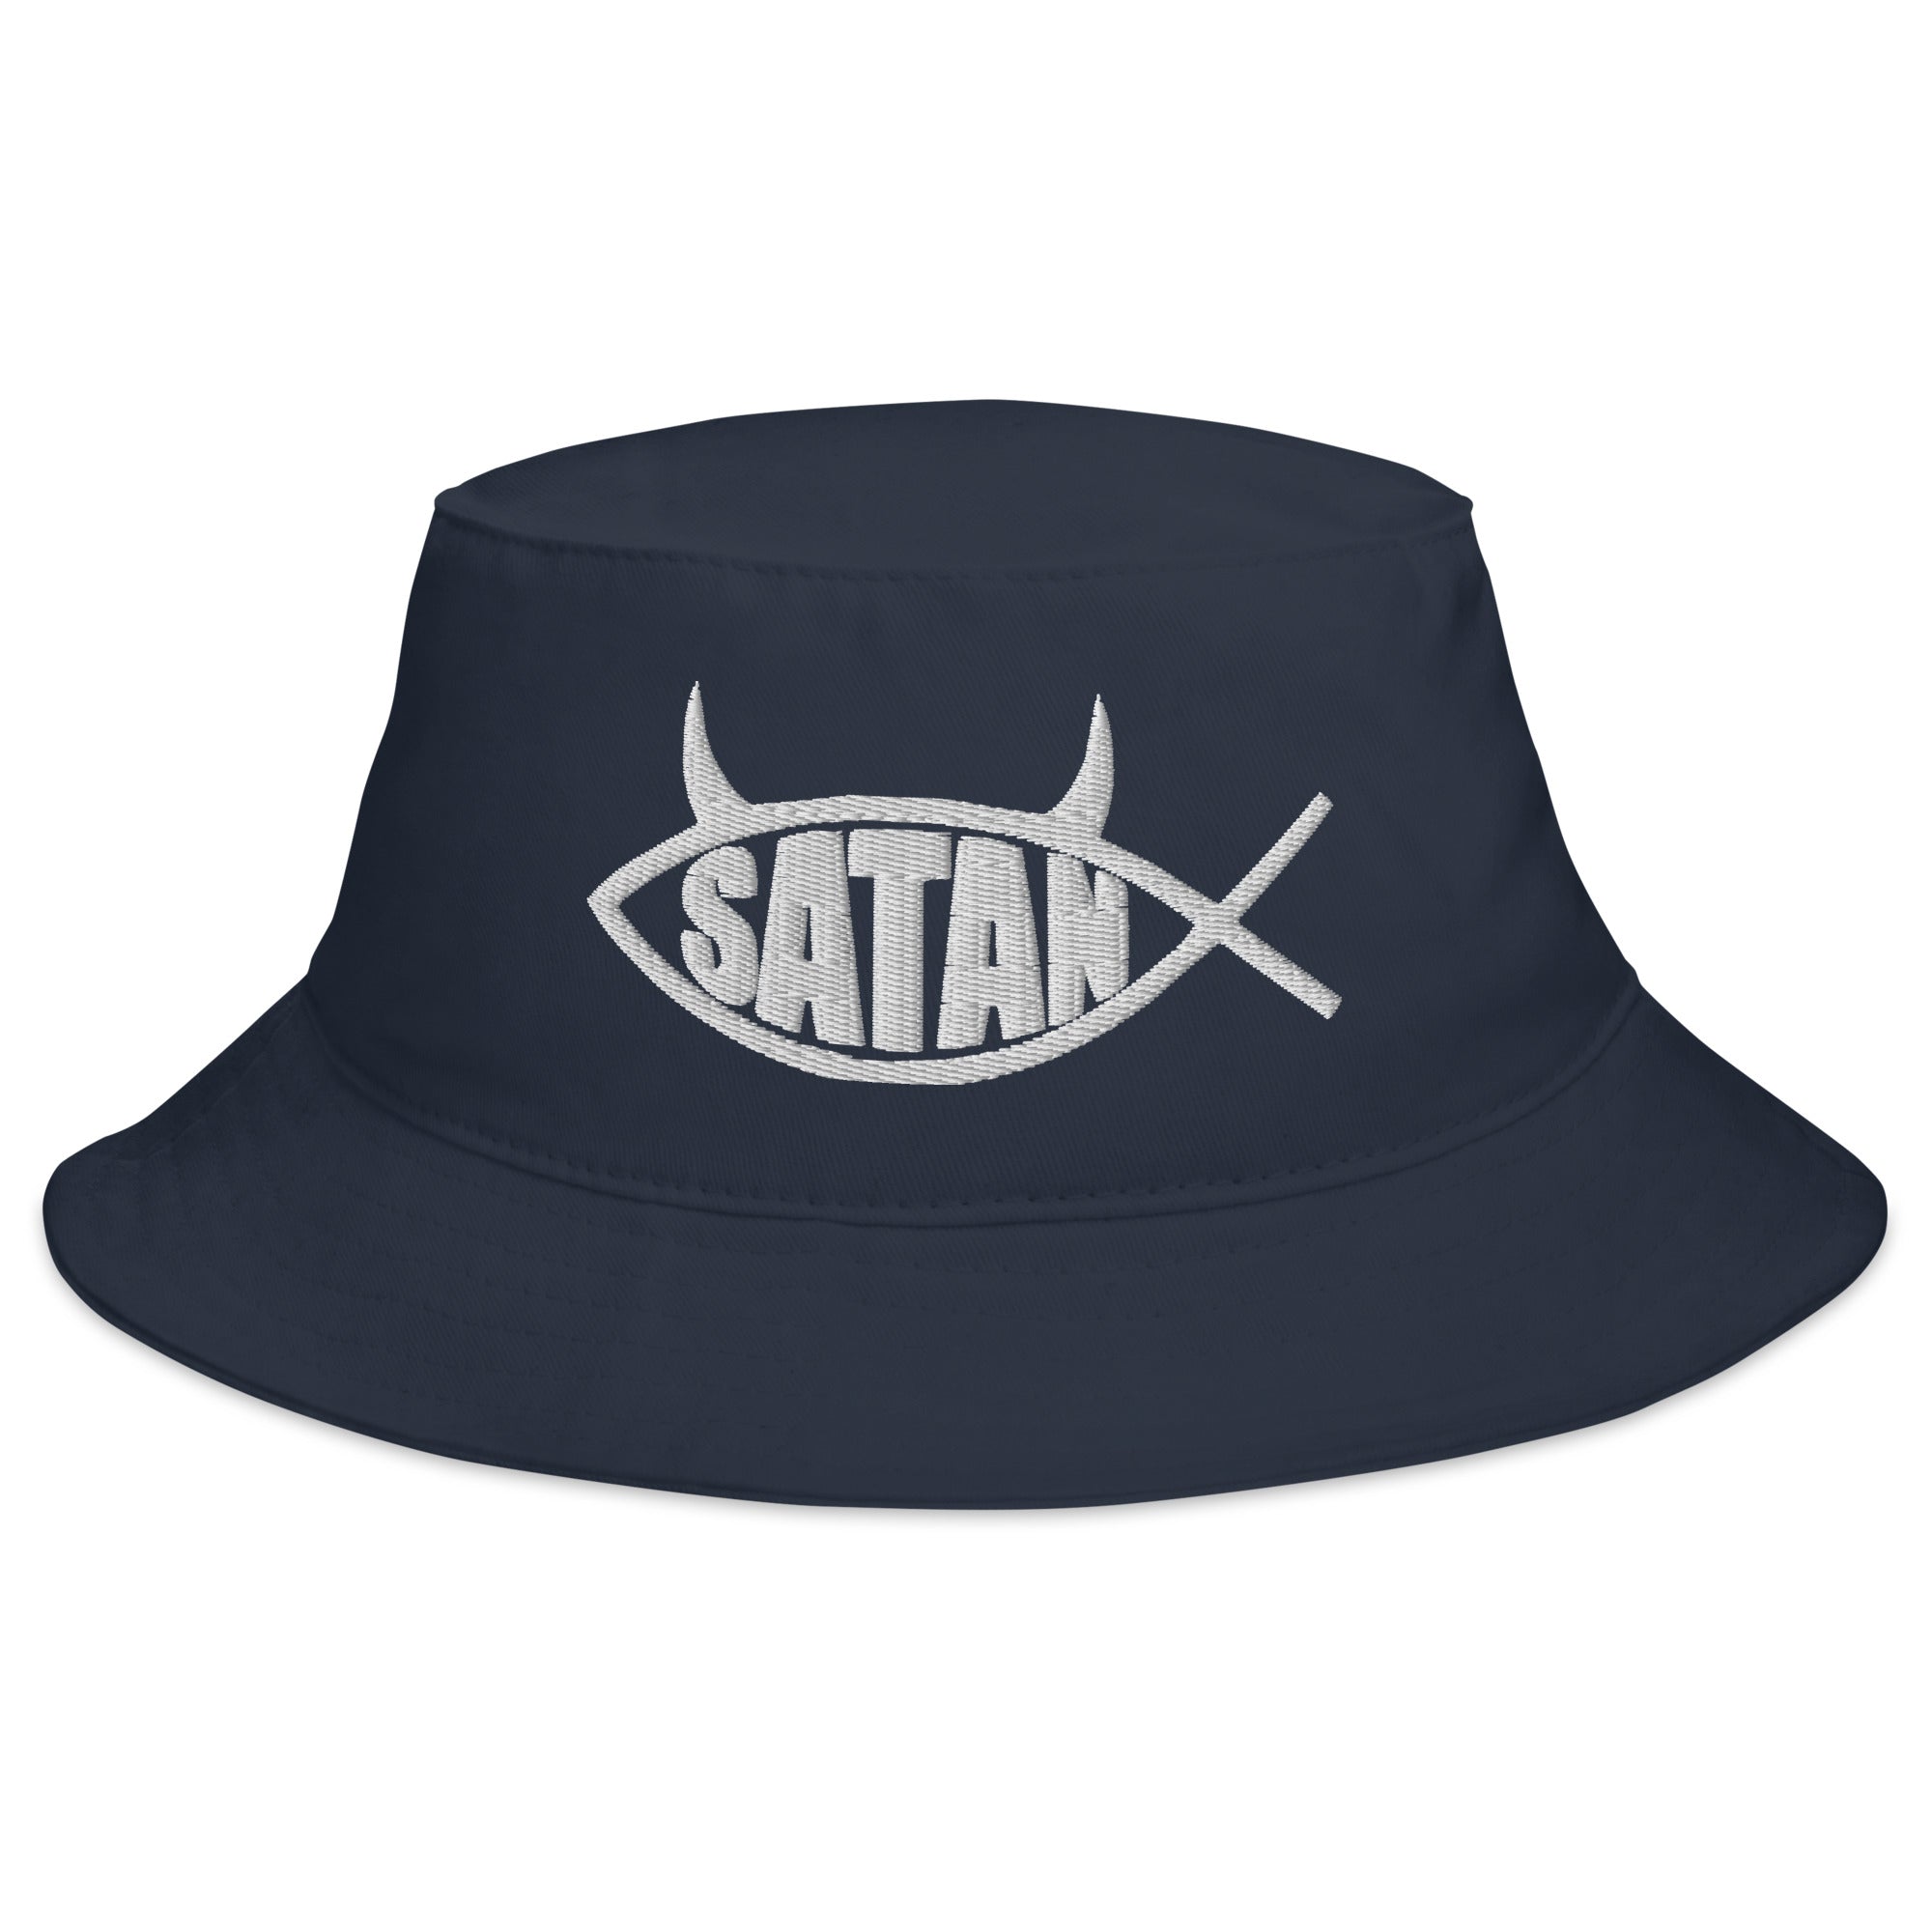 Satan Fish with Horns Religious Satire Embroidered Bucket Hat Satanic Church